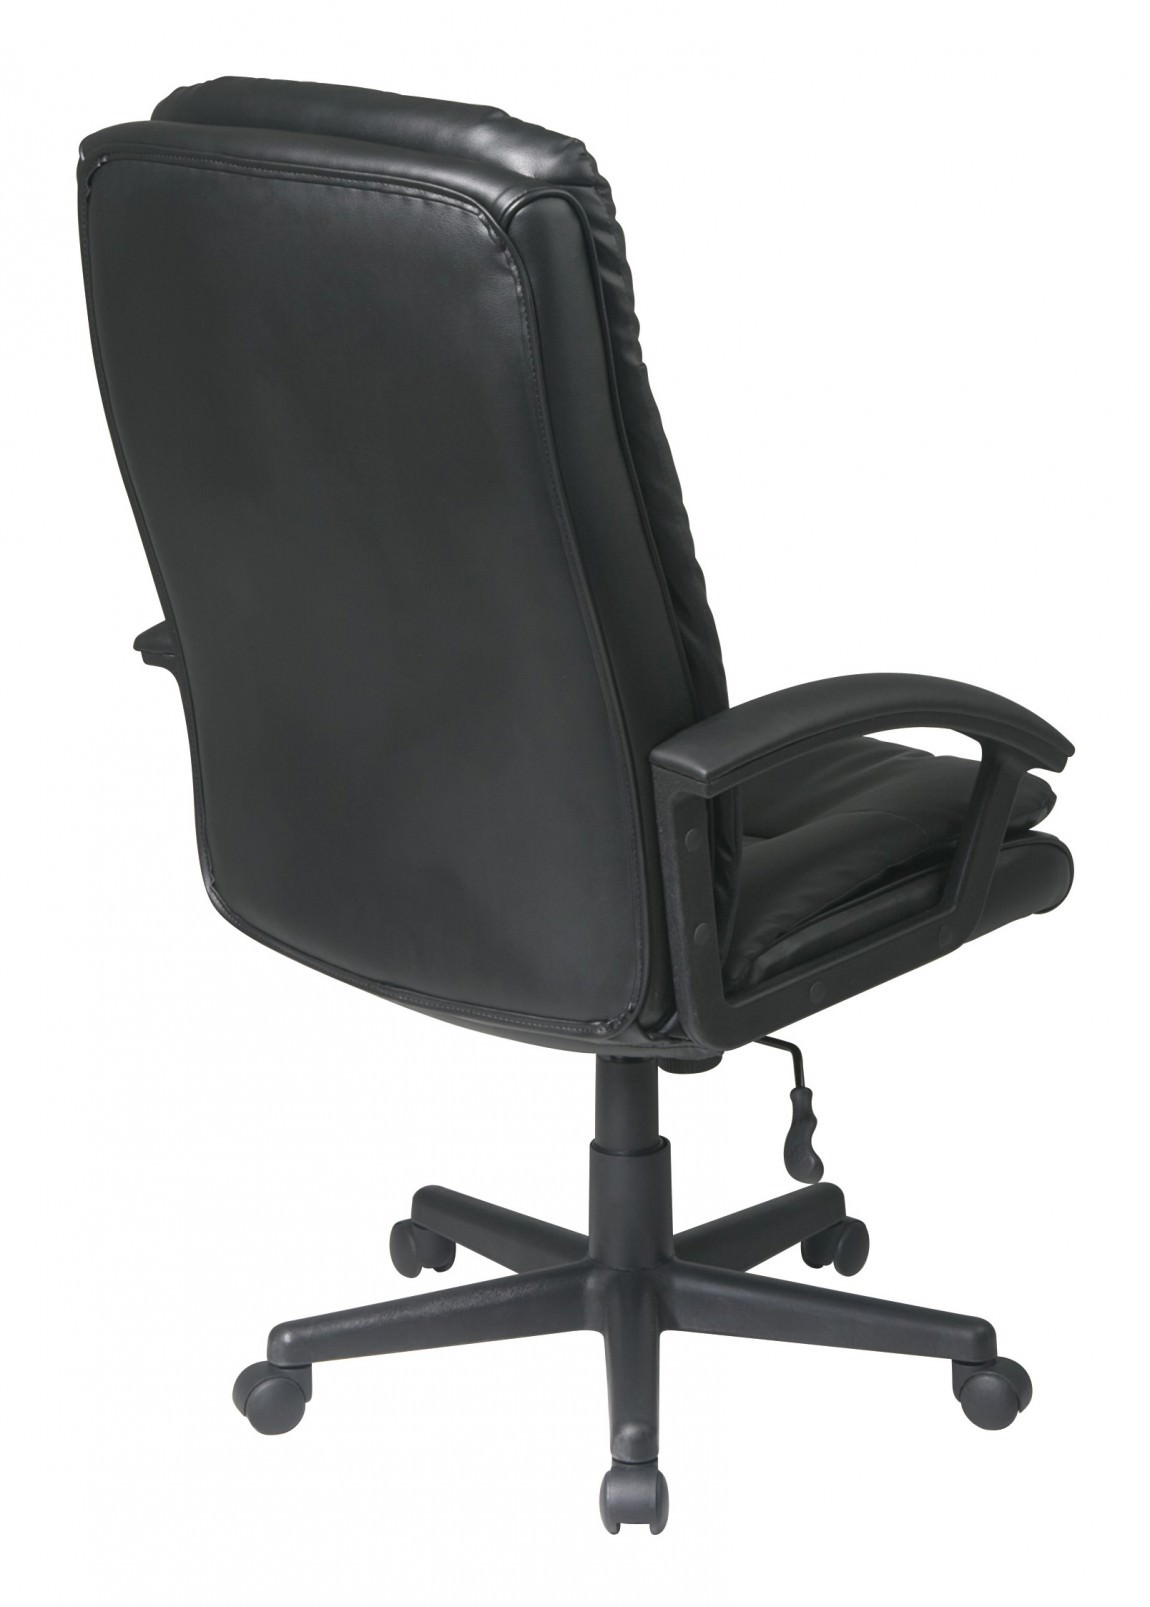 Black Executive Office Chair | Work Smart by Office Star Products